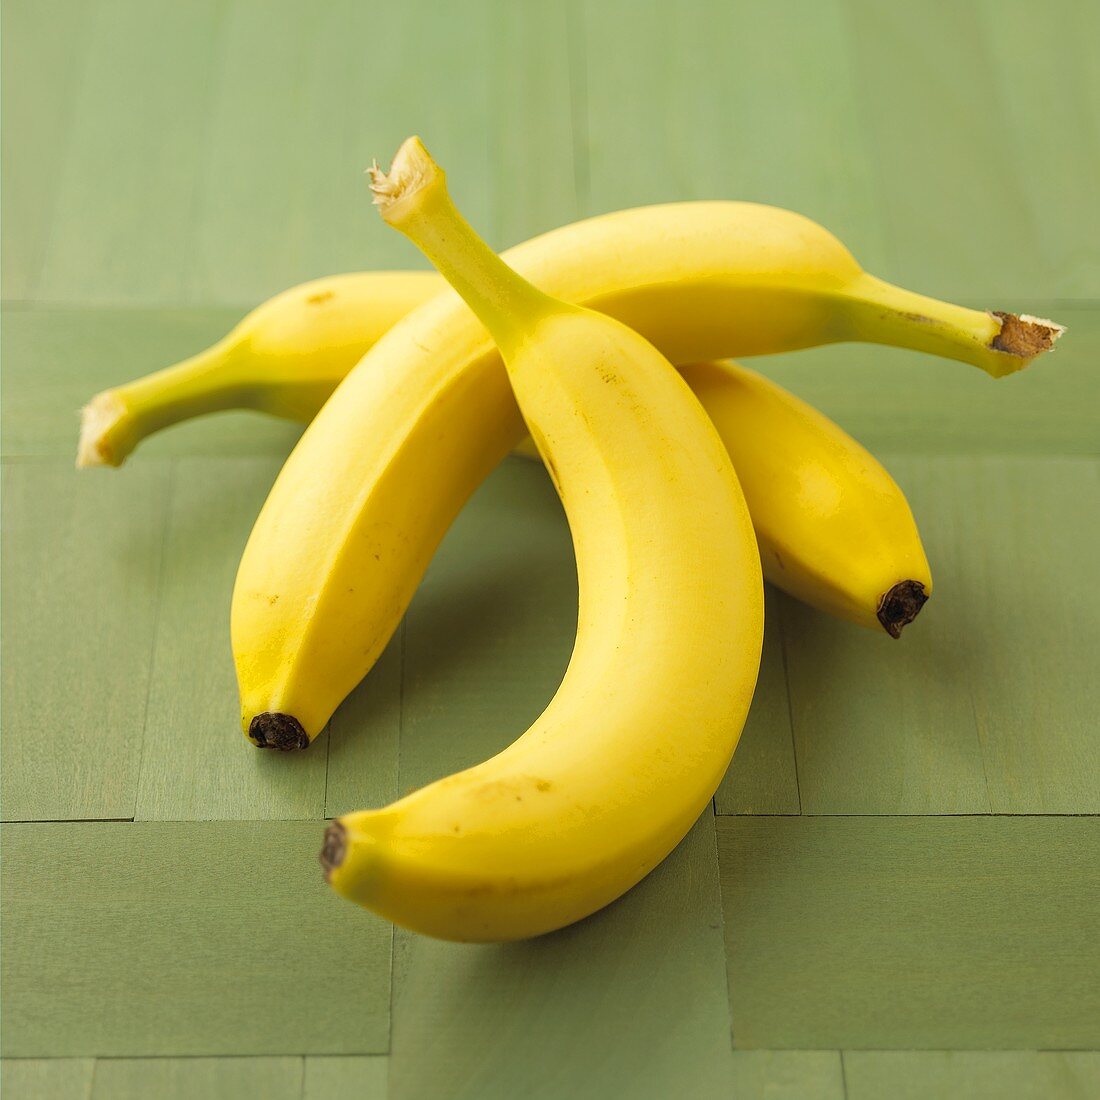 Three bananas on a green background